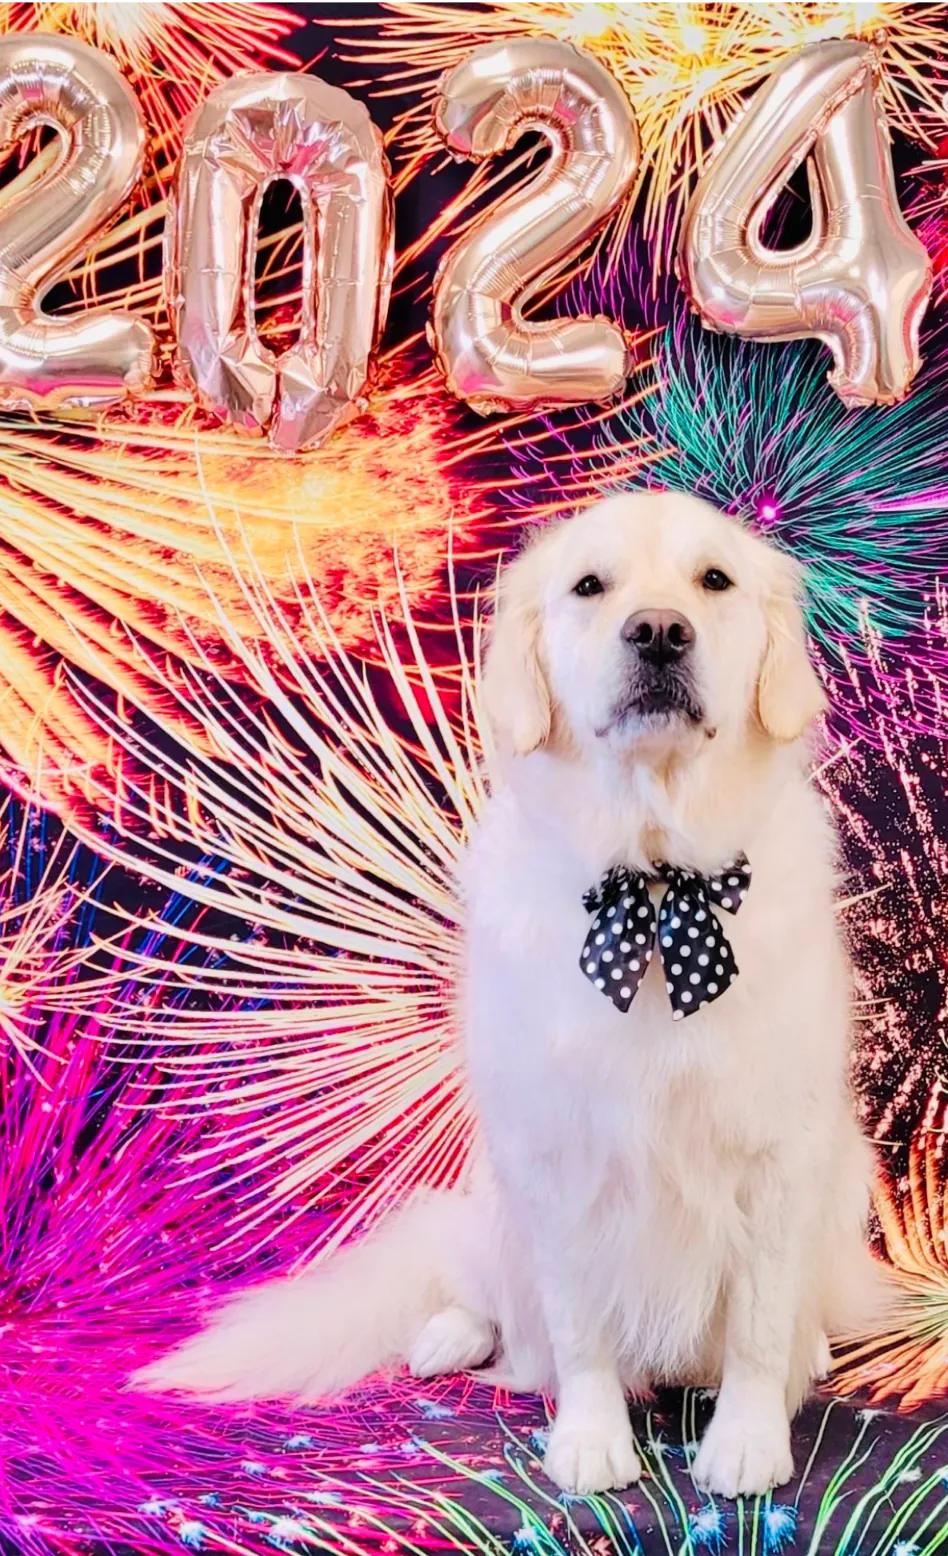 A Golden Retriever celebrating the New Year with a festive backdrop, wearing a black bow tie with polka dots, in front of shimmering balloons shaped as 2024 and colorful fireworks.